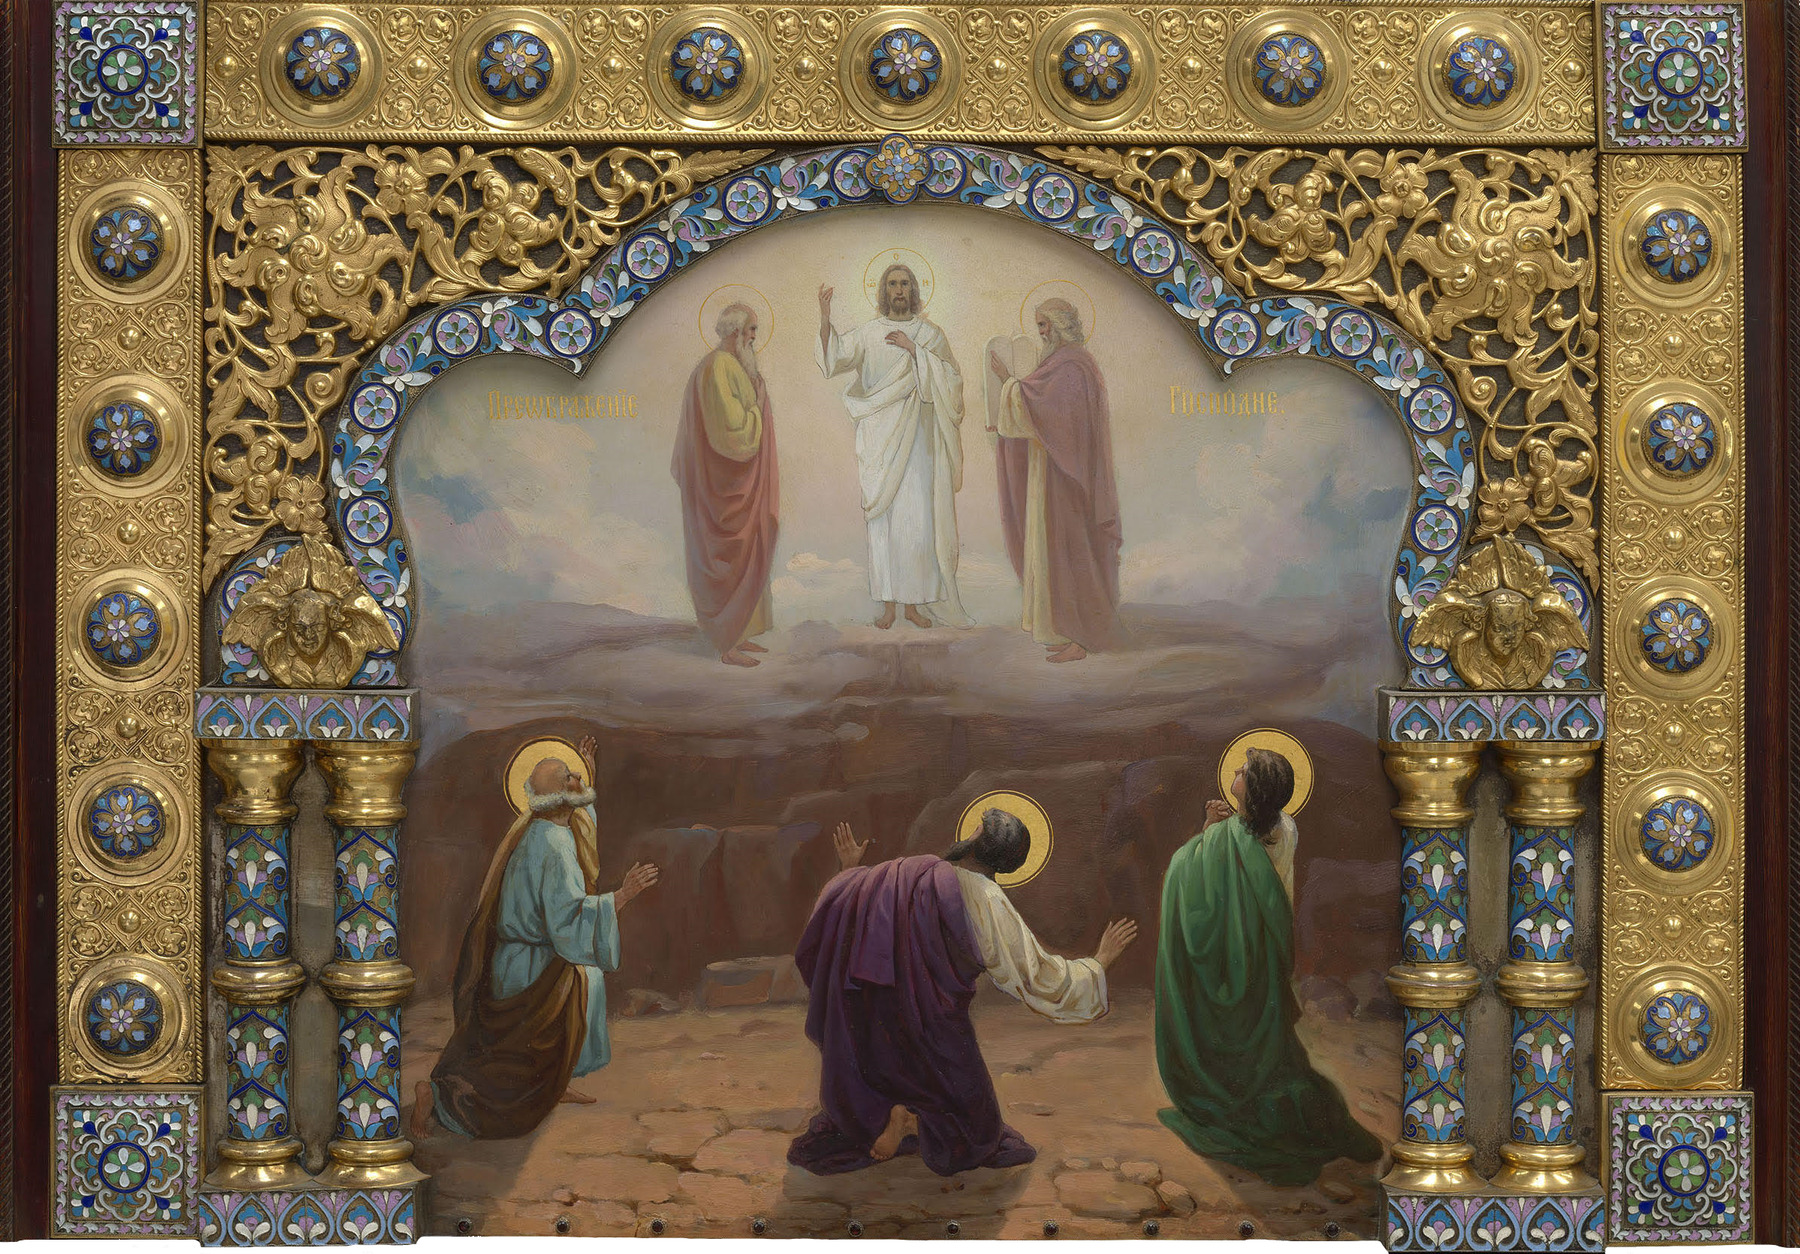 The Transfiguration on Mount Tabor in a Silver-Gilt and Cloisonné Enamel Oklad